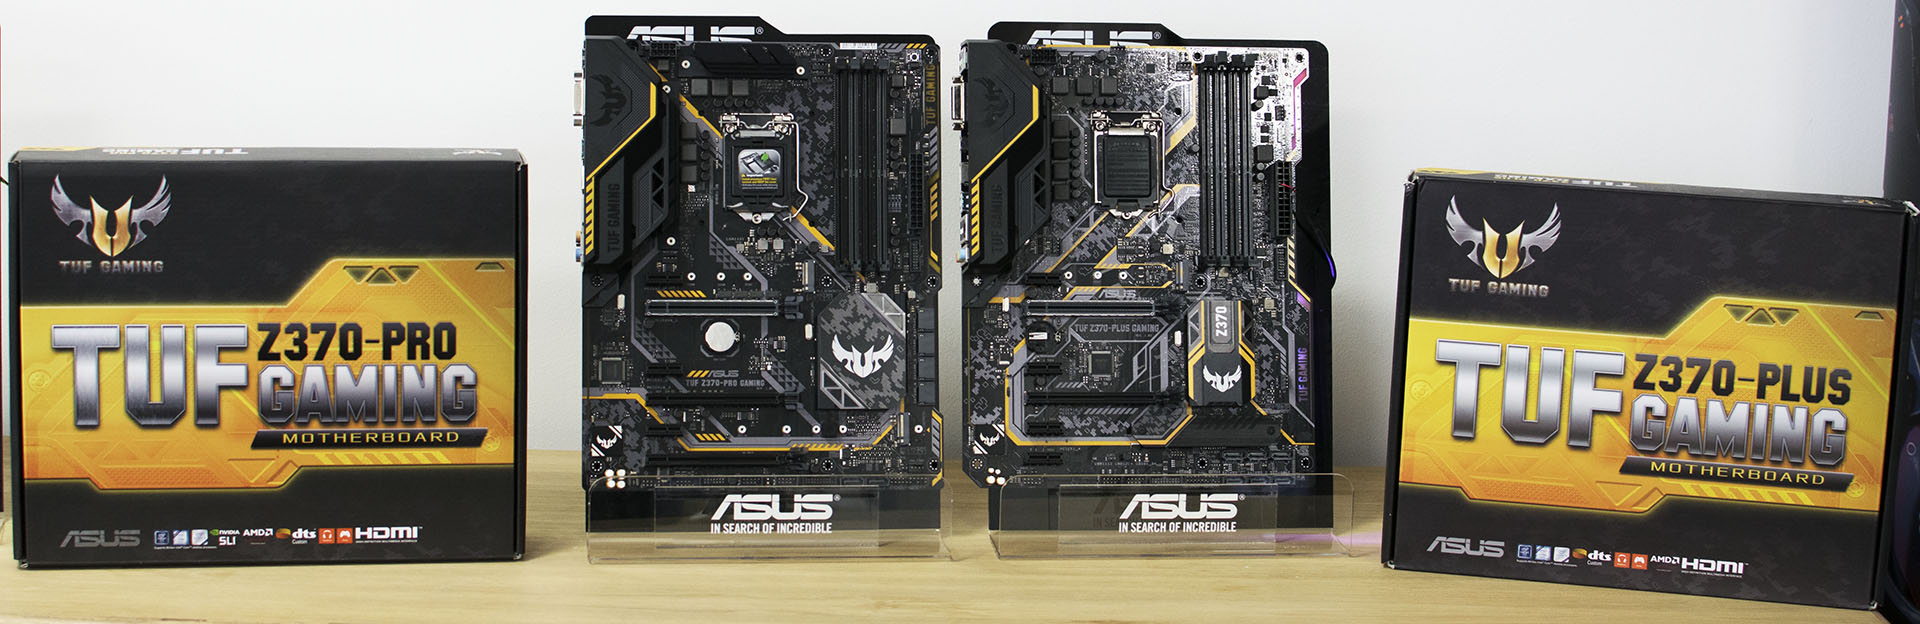 Eddike grammatik Ofte talt ASUS TUF Z370-PRO Gaming & Z370-PLUS Gaming - Analyzing Z370 for Intel's  8th Generation Coffee Lake: A Quick Look at 50+ Motherboards